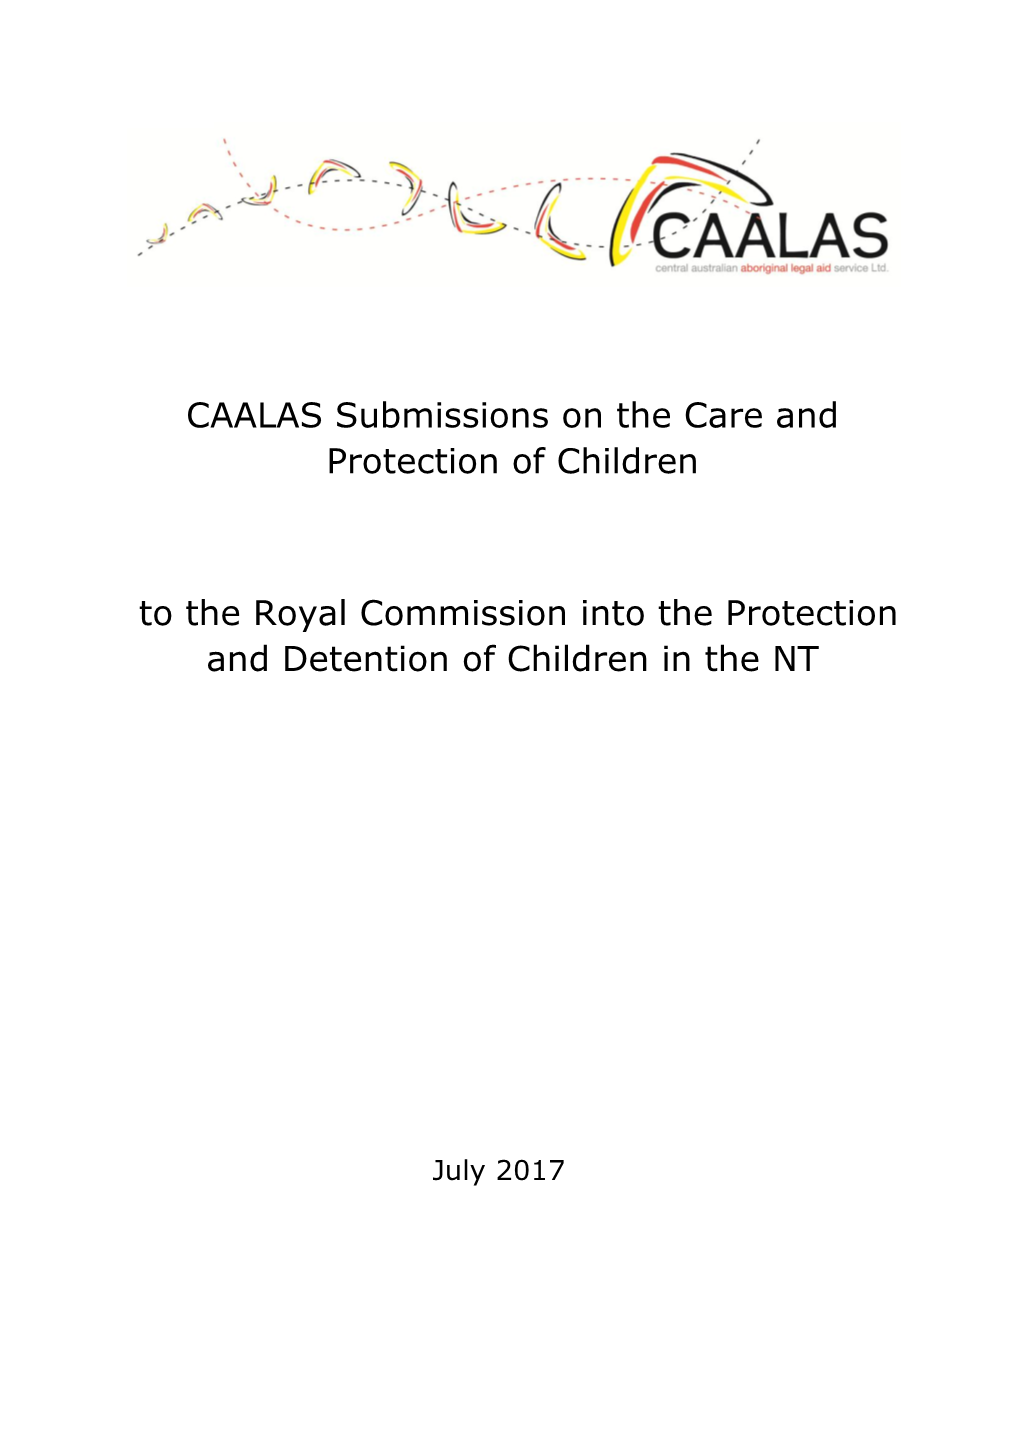 CAALAS Submissions on the Care and Protection of Children